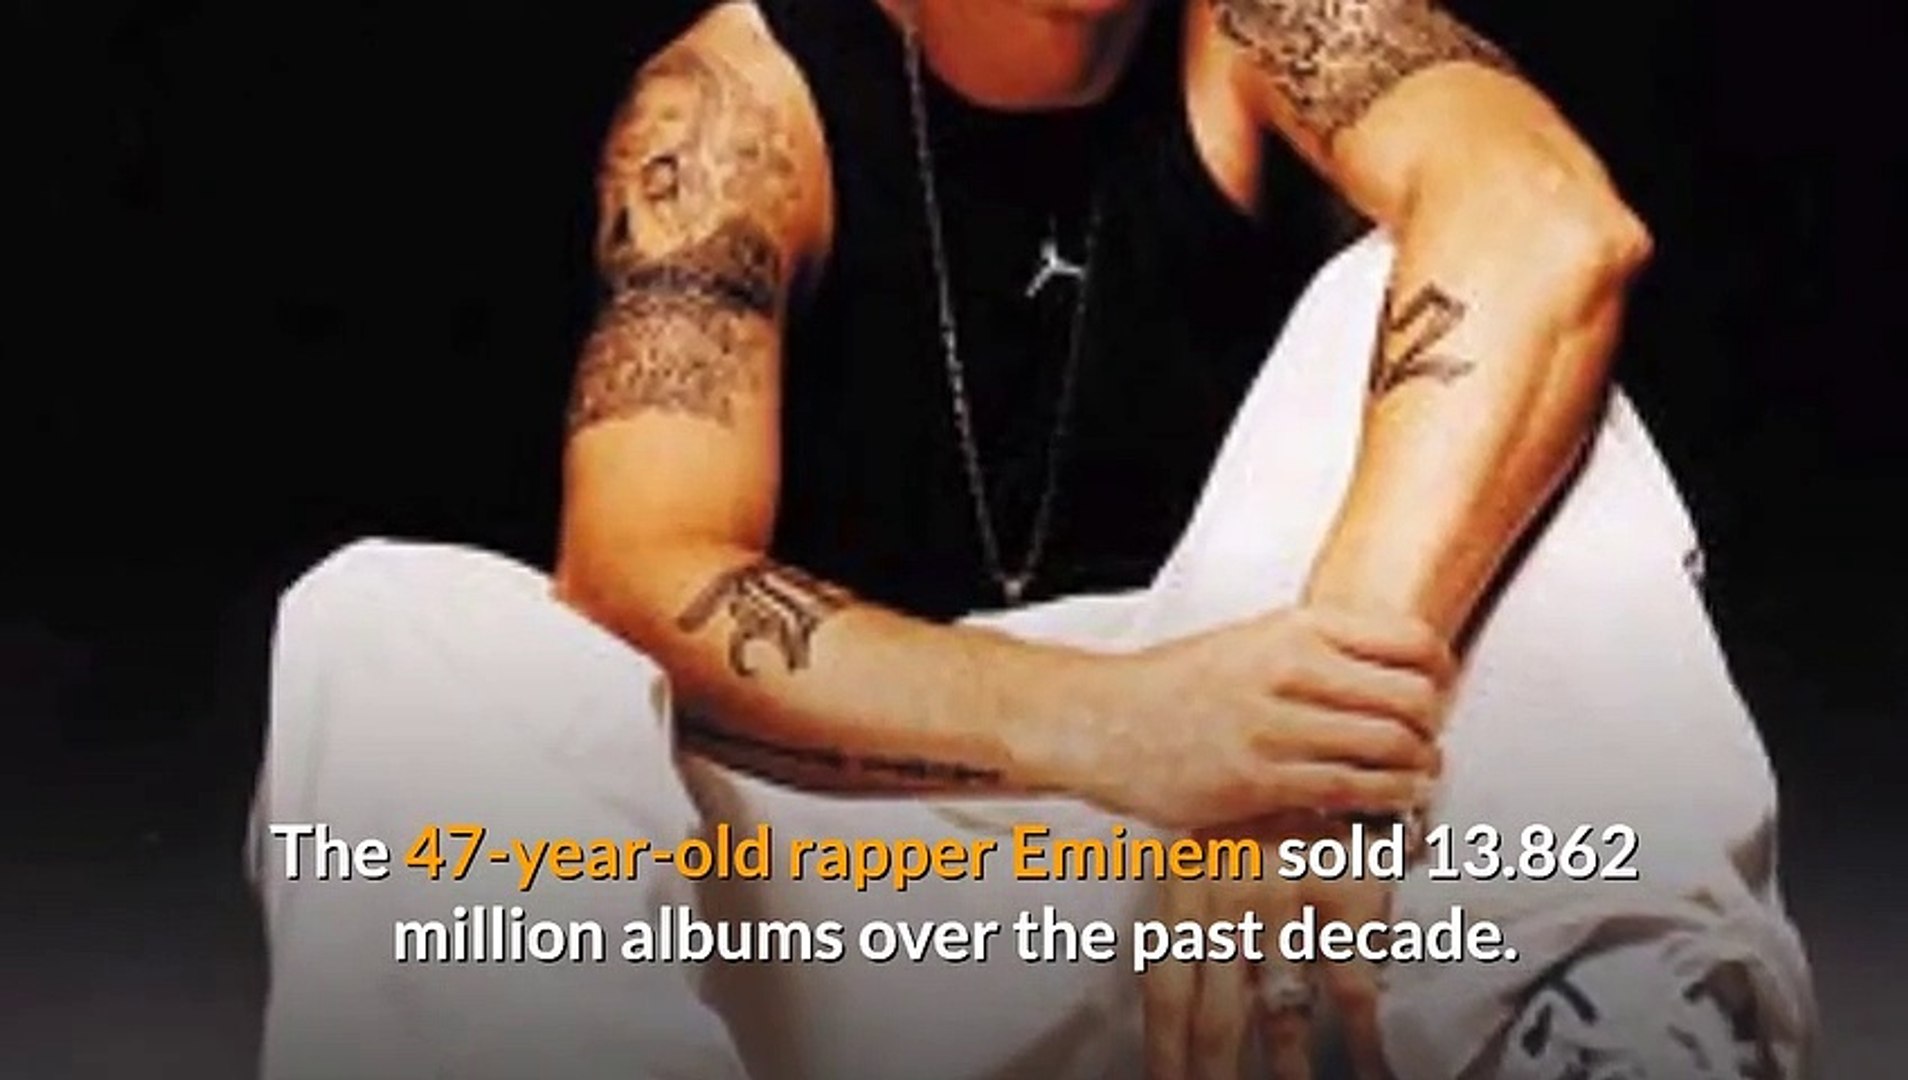 Eminem dominated the 2010s--facts inside